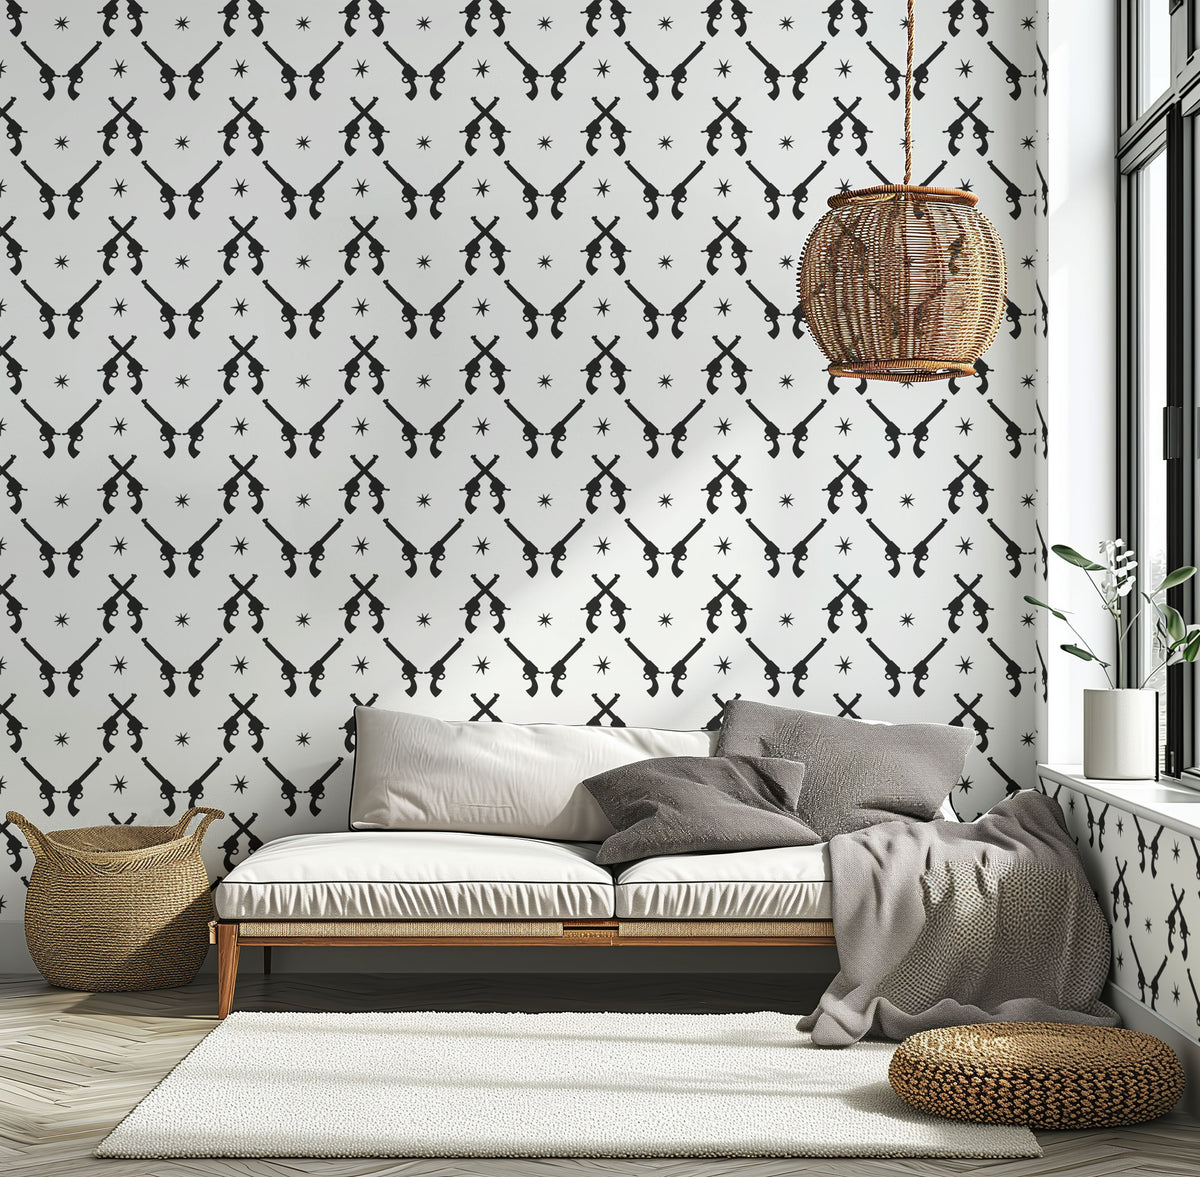 Contemporary Black & White Peel & Stick Wallpaper for Funky Western Rooms